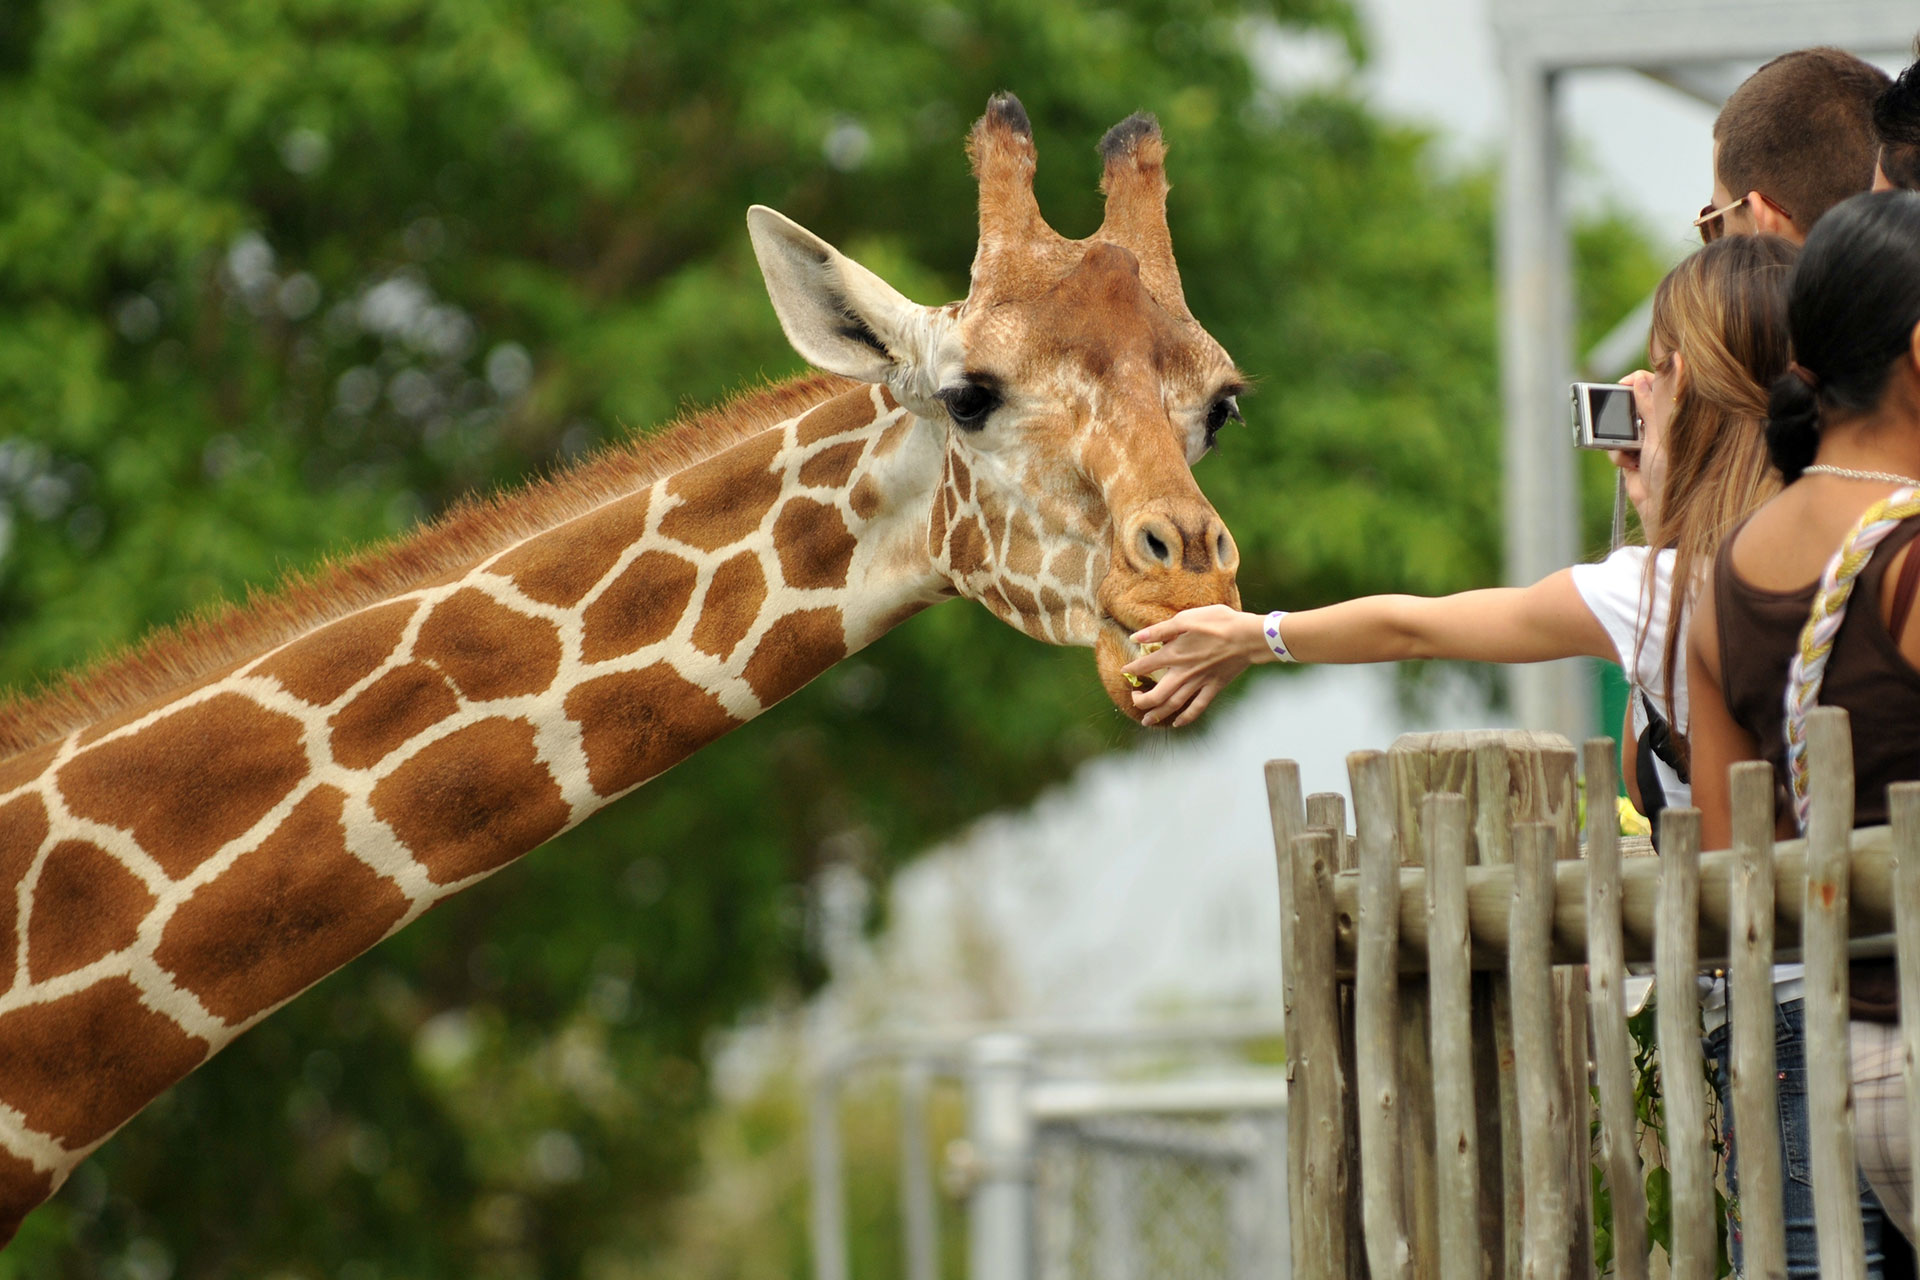 Excited zoo visitors are taking a photo of a giraffe during a close-up encounter at an EAZA and WAZA accredited zoo.